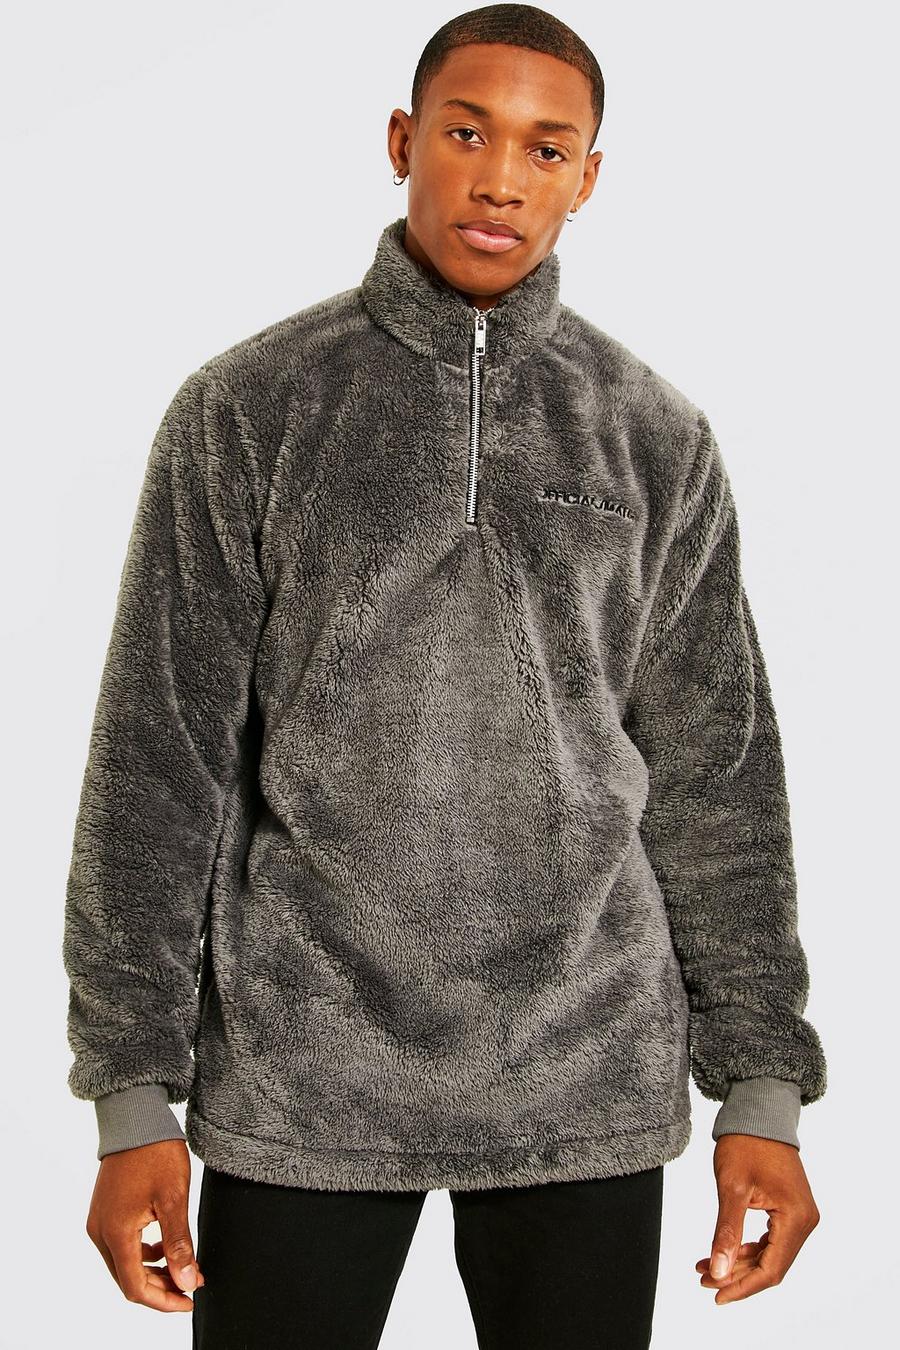 Charcoal grey Official Man Borg Funnel Neck Sweatshirt image number 1